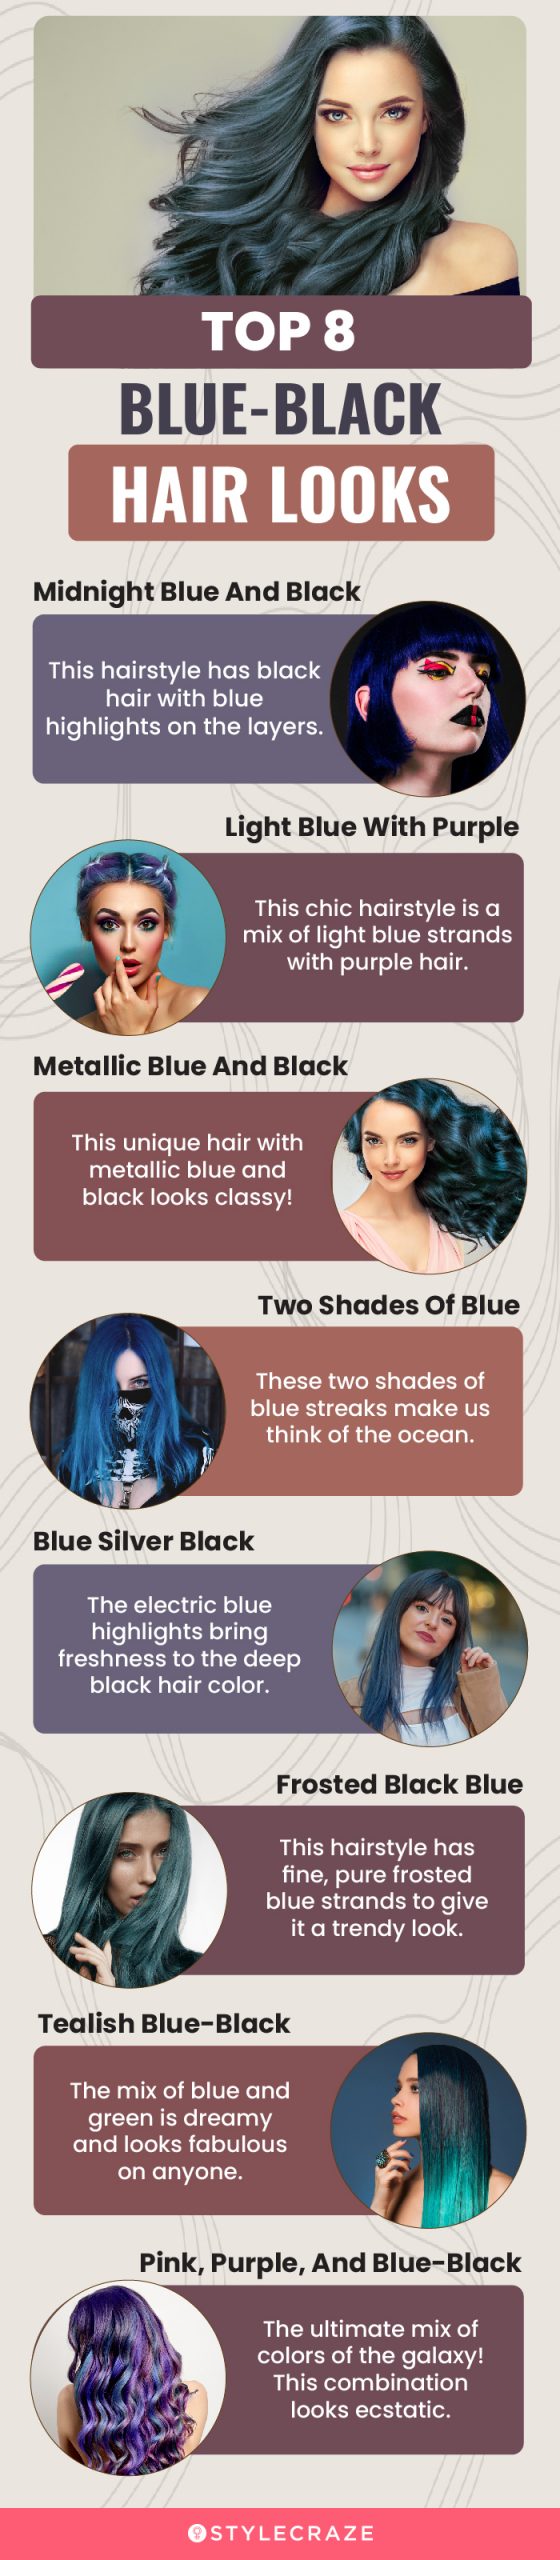 top 8 blue black hair looks (infographic)